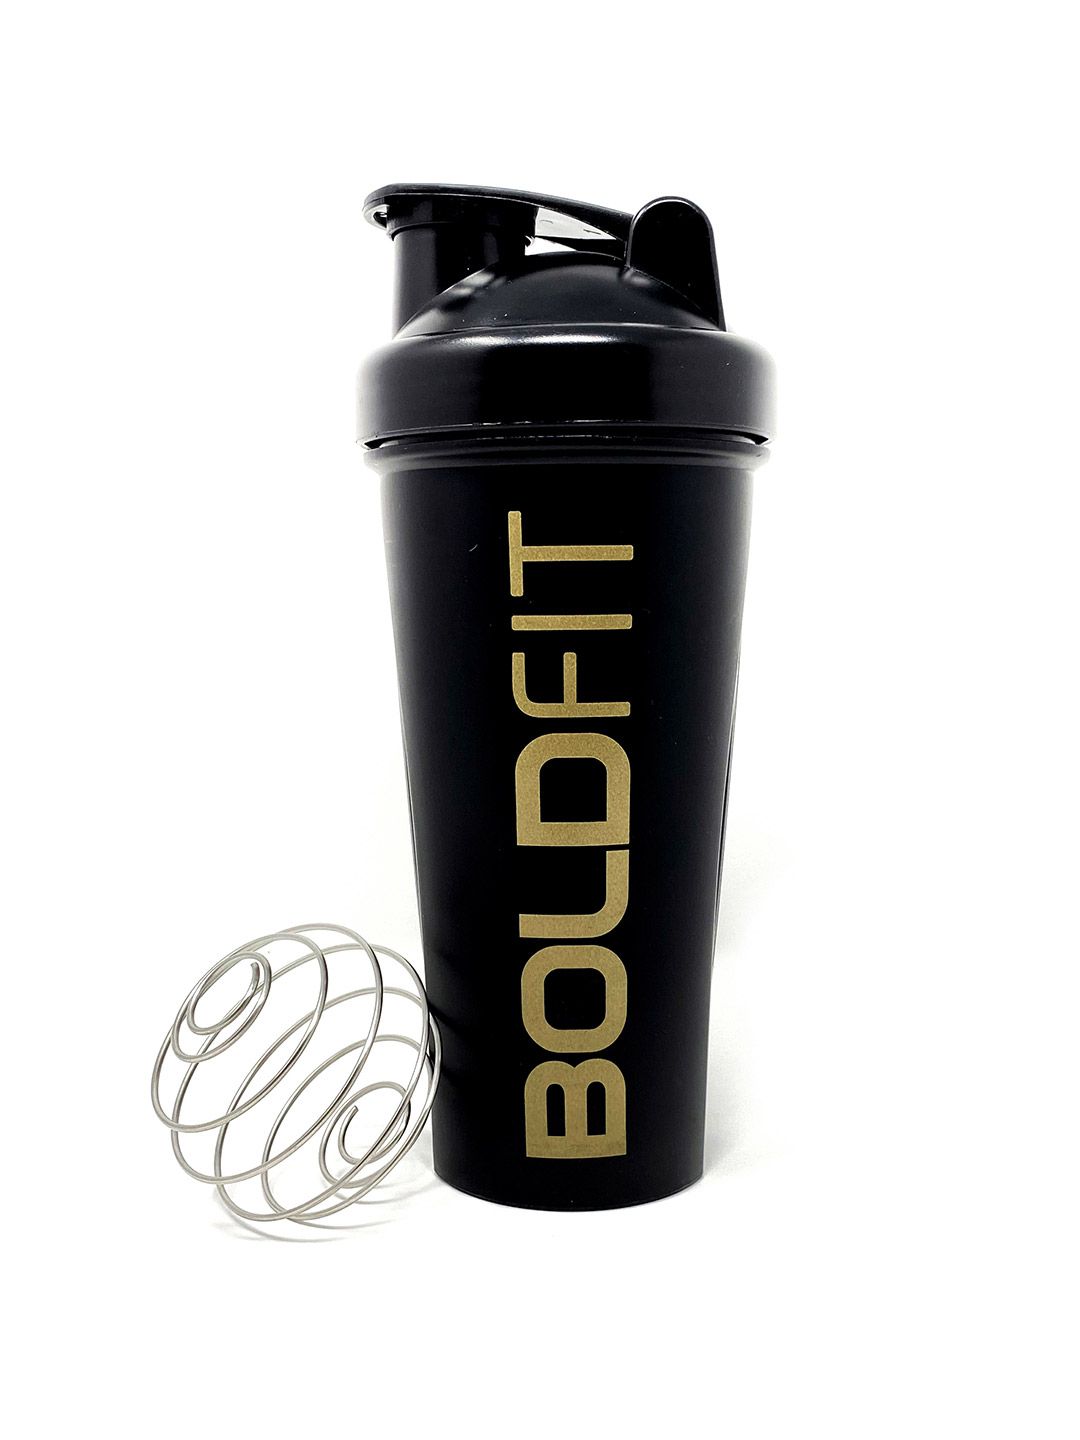 BOLDFIT Black Solid Gym Shaker For Protein Shake Sipper Water Bottle BPA Free Price in India